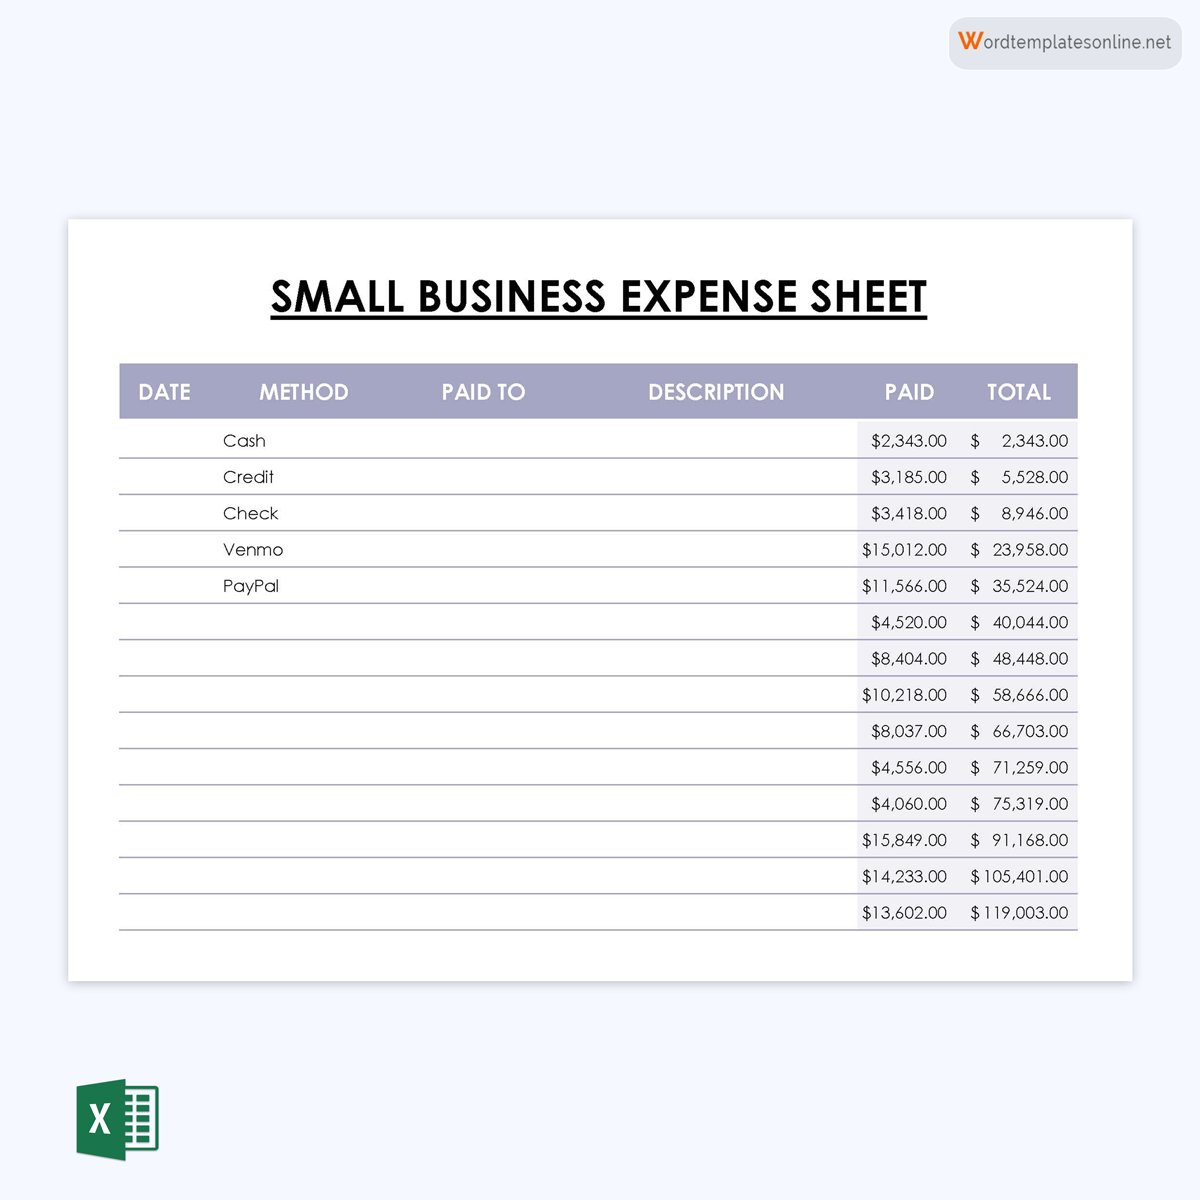 Free Printable Small Business Expense Sheet Template as Excel Format